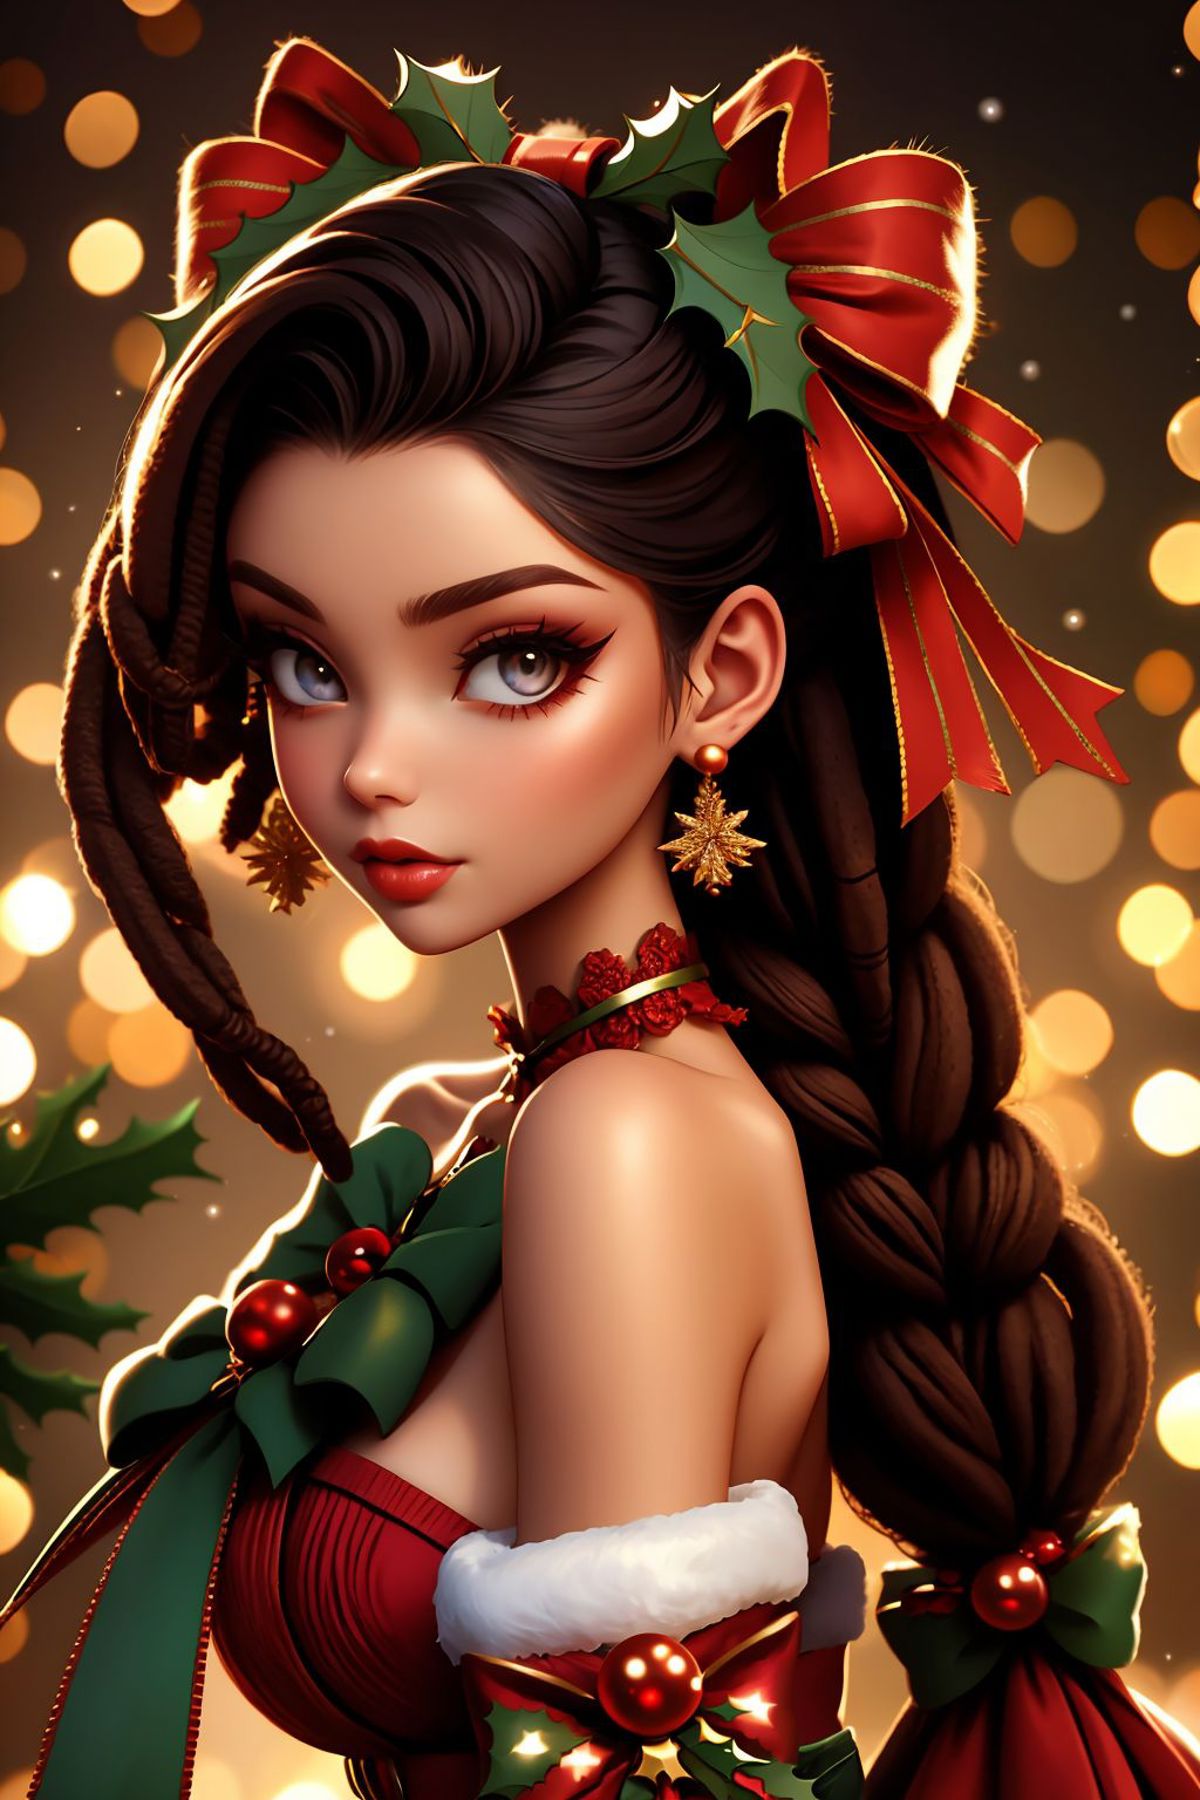 Christmas Pin Up Dress image by Montitto